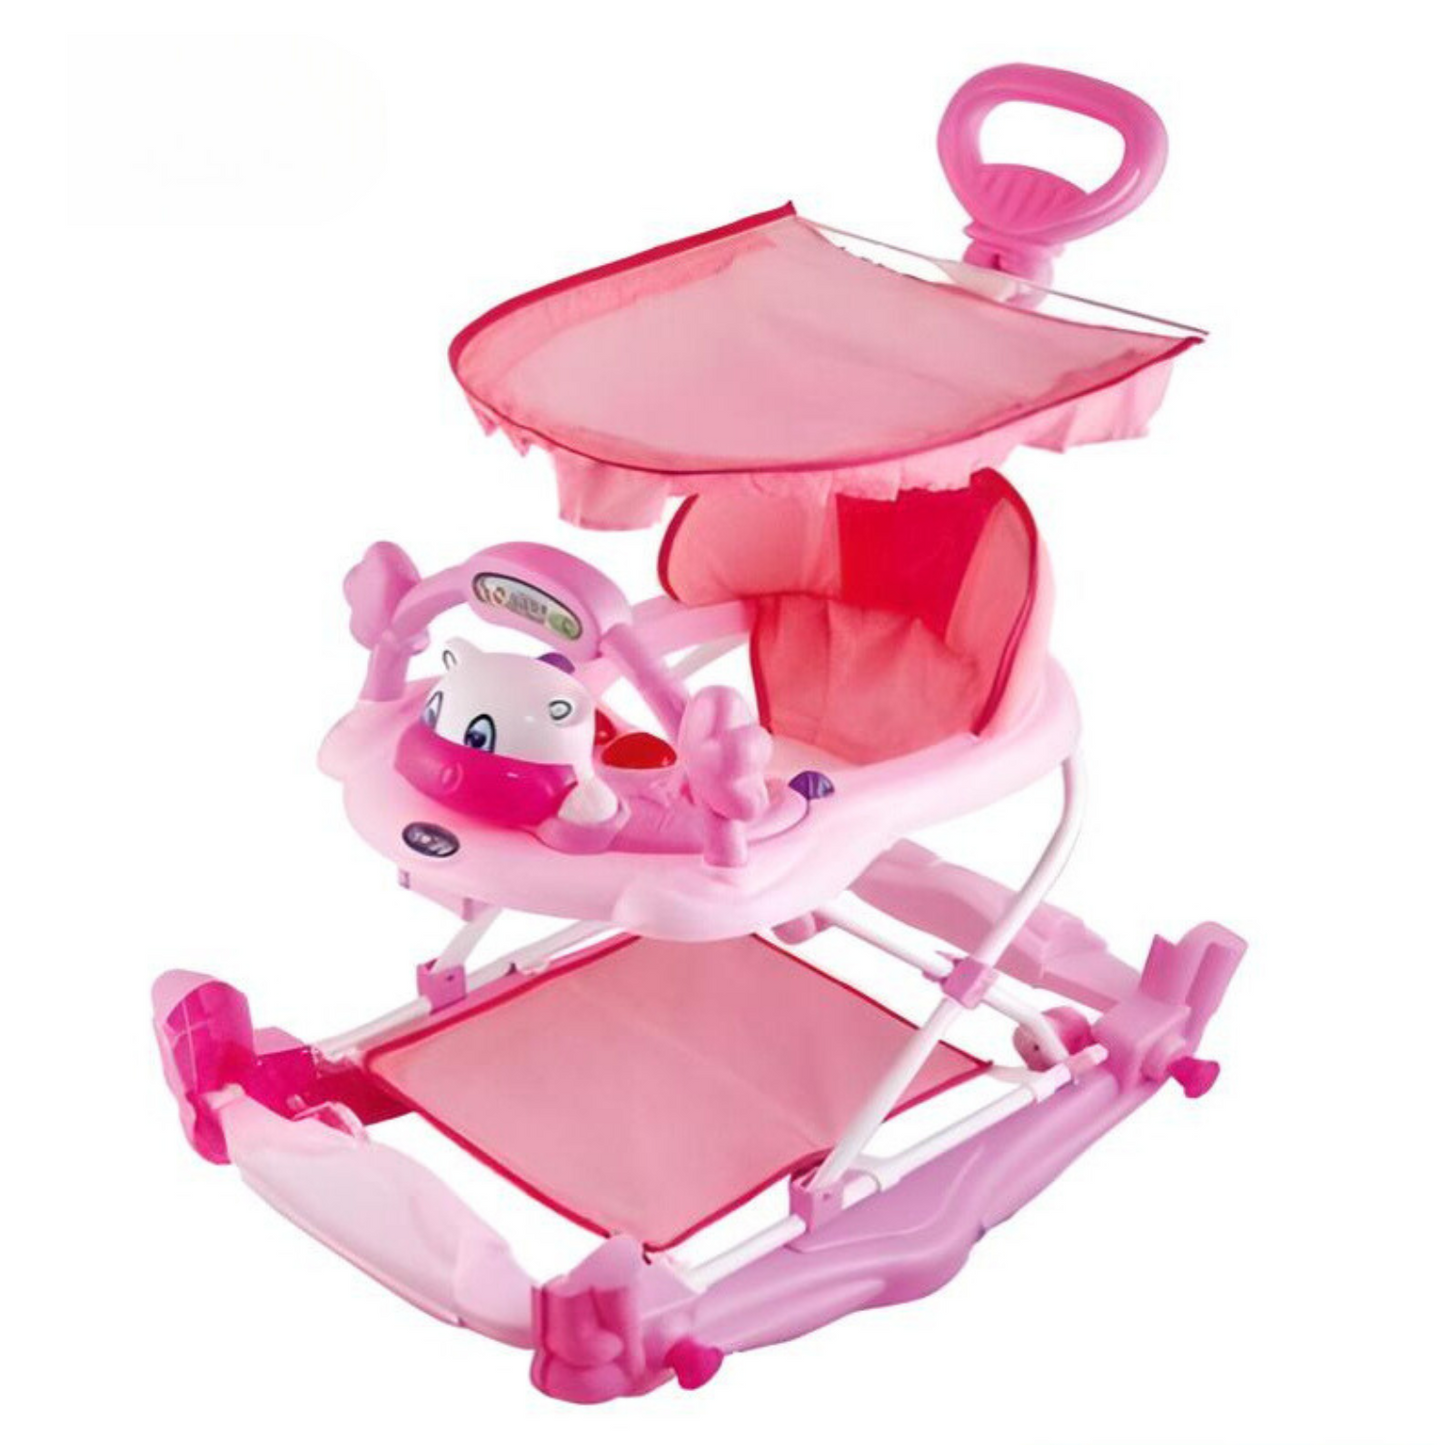 Love Baby - 3105 Adjustable Baby Walker, 6+ Months, with Canopy, Parenting Handle, Detachable Foot Mat, Lights & Music, Anti-Slip Base, Heavy Plastic color Pink